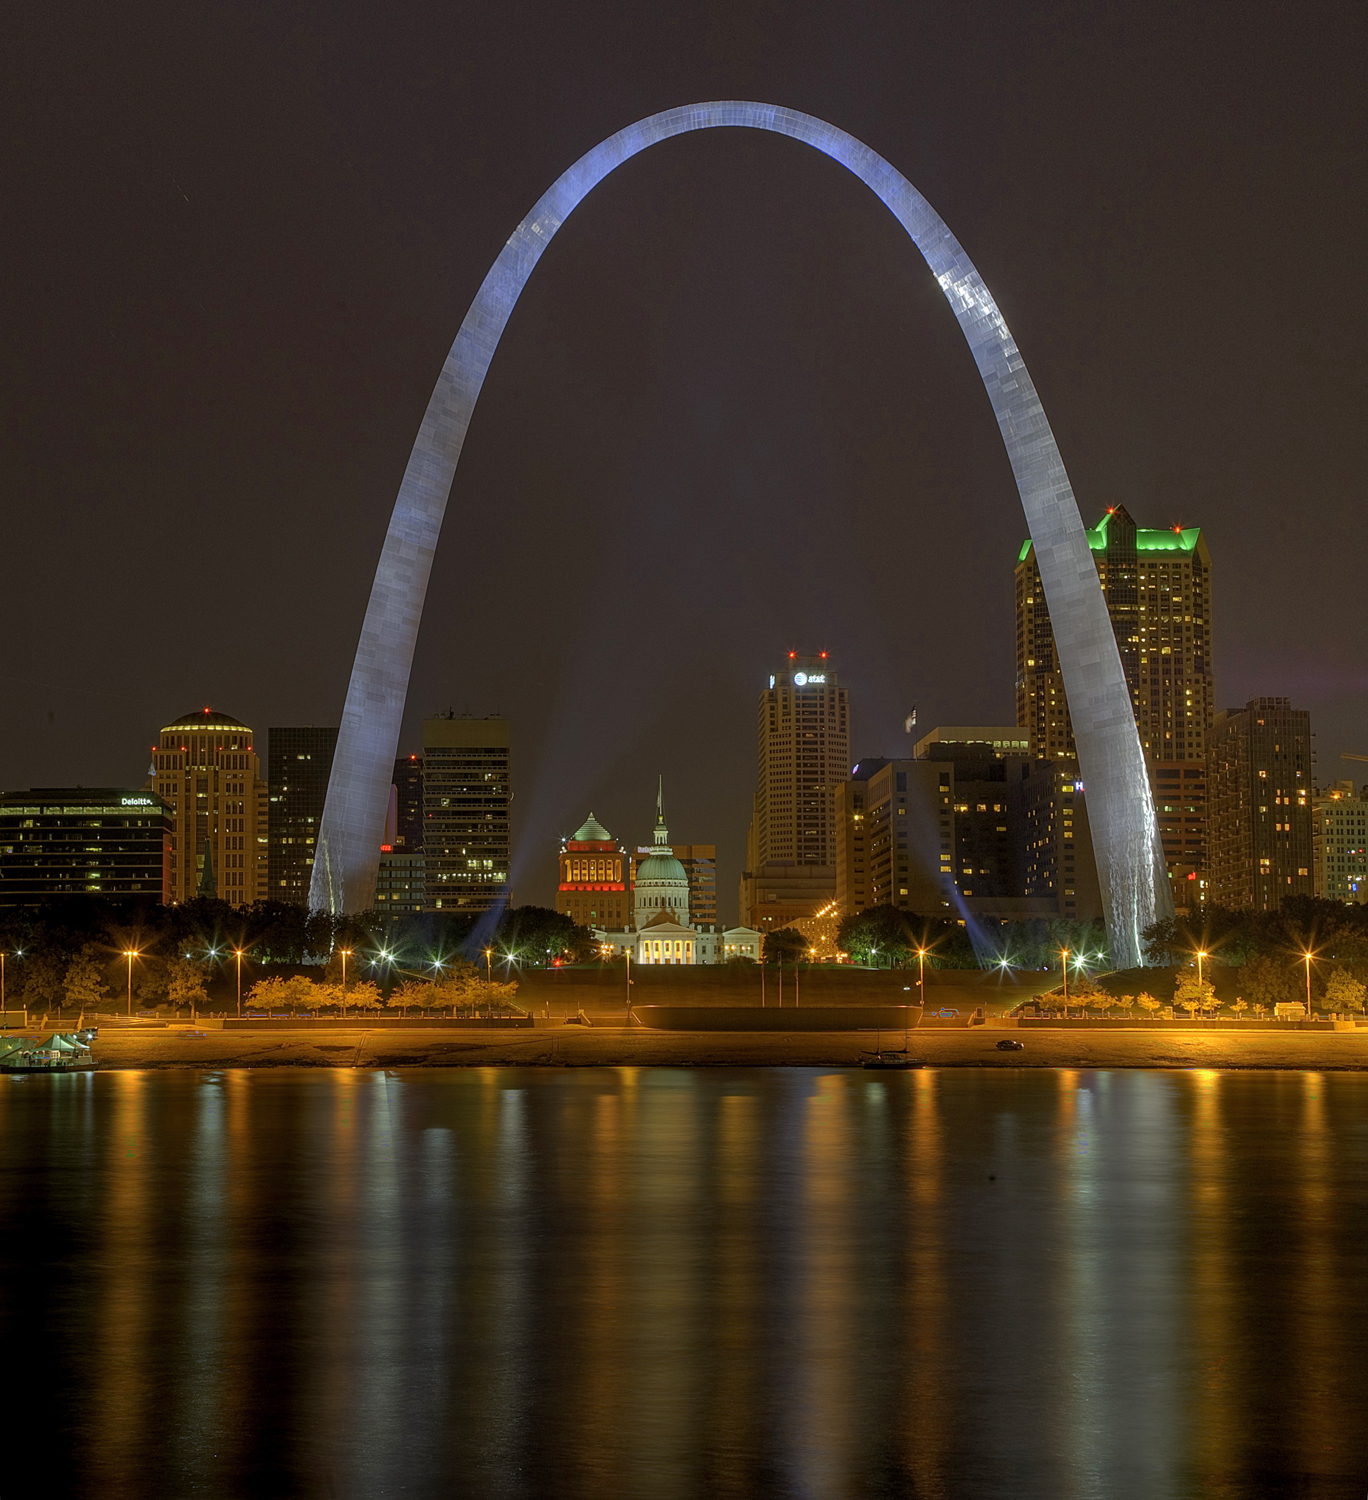 Meet me in St. Louis -- for a most sinful time! - 0